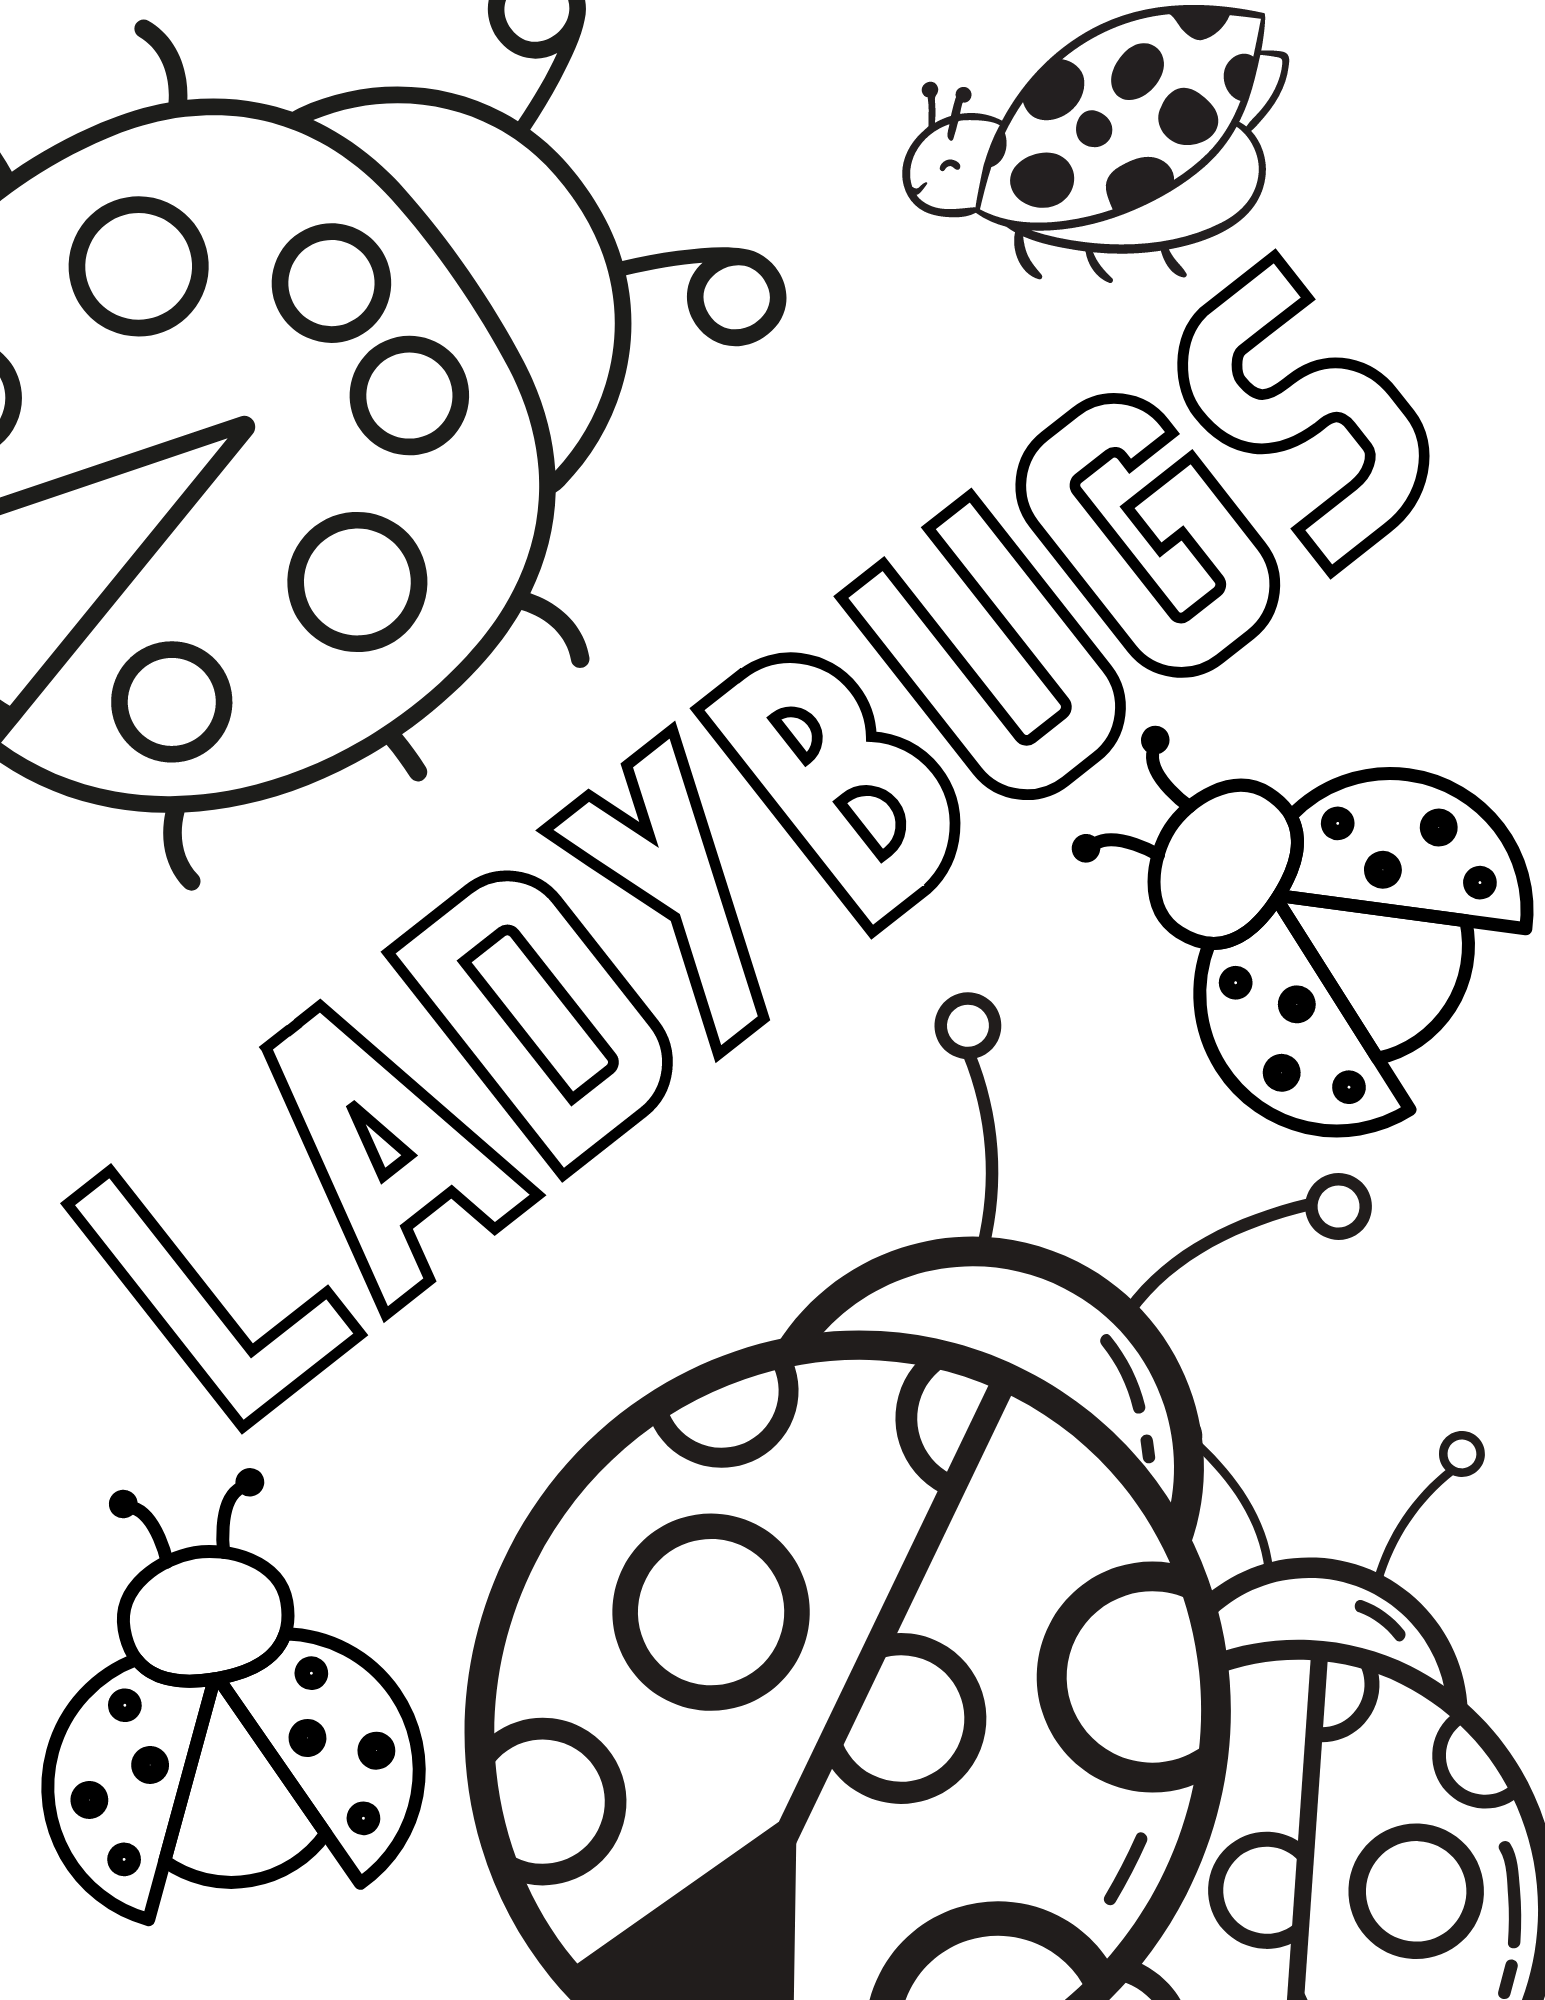 Ladybird, others, miscellaneous, child, artwork png